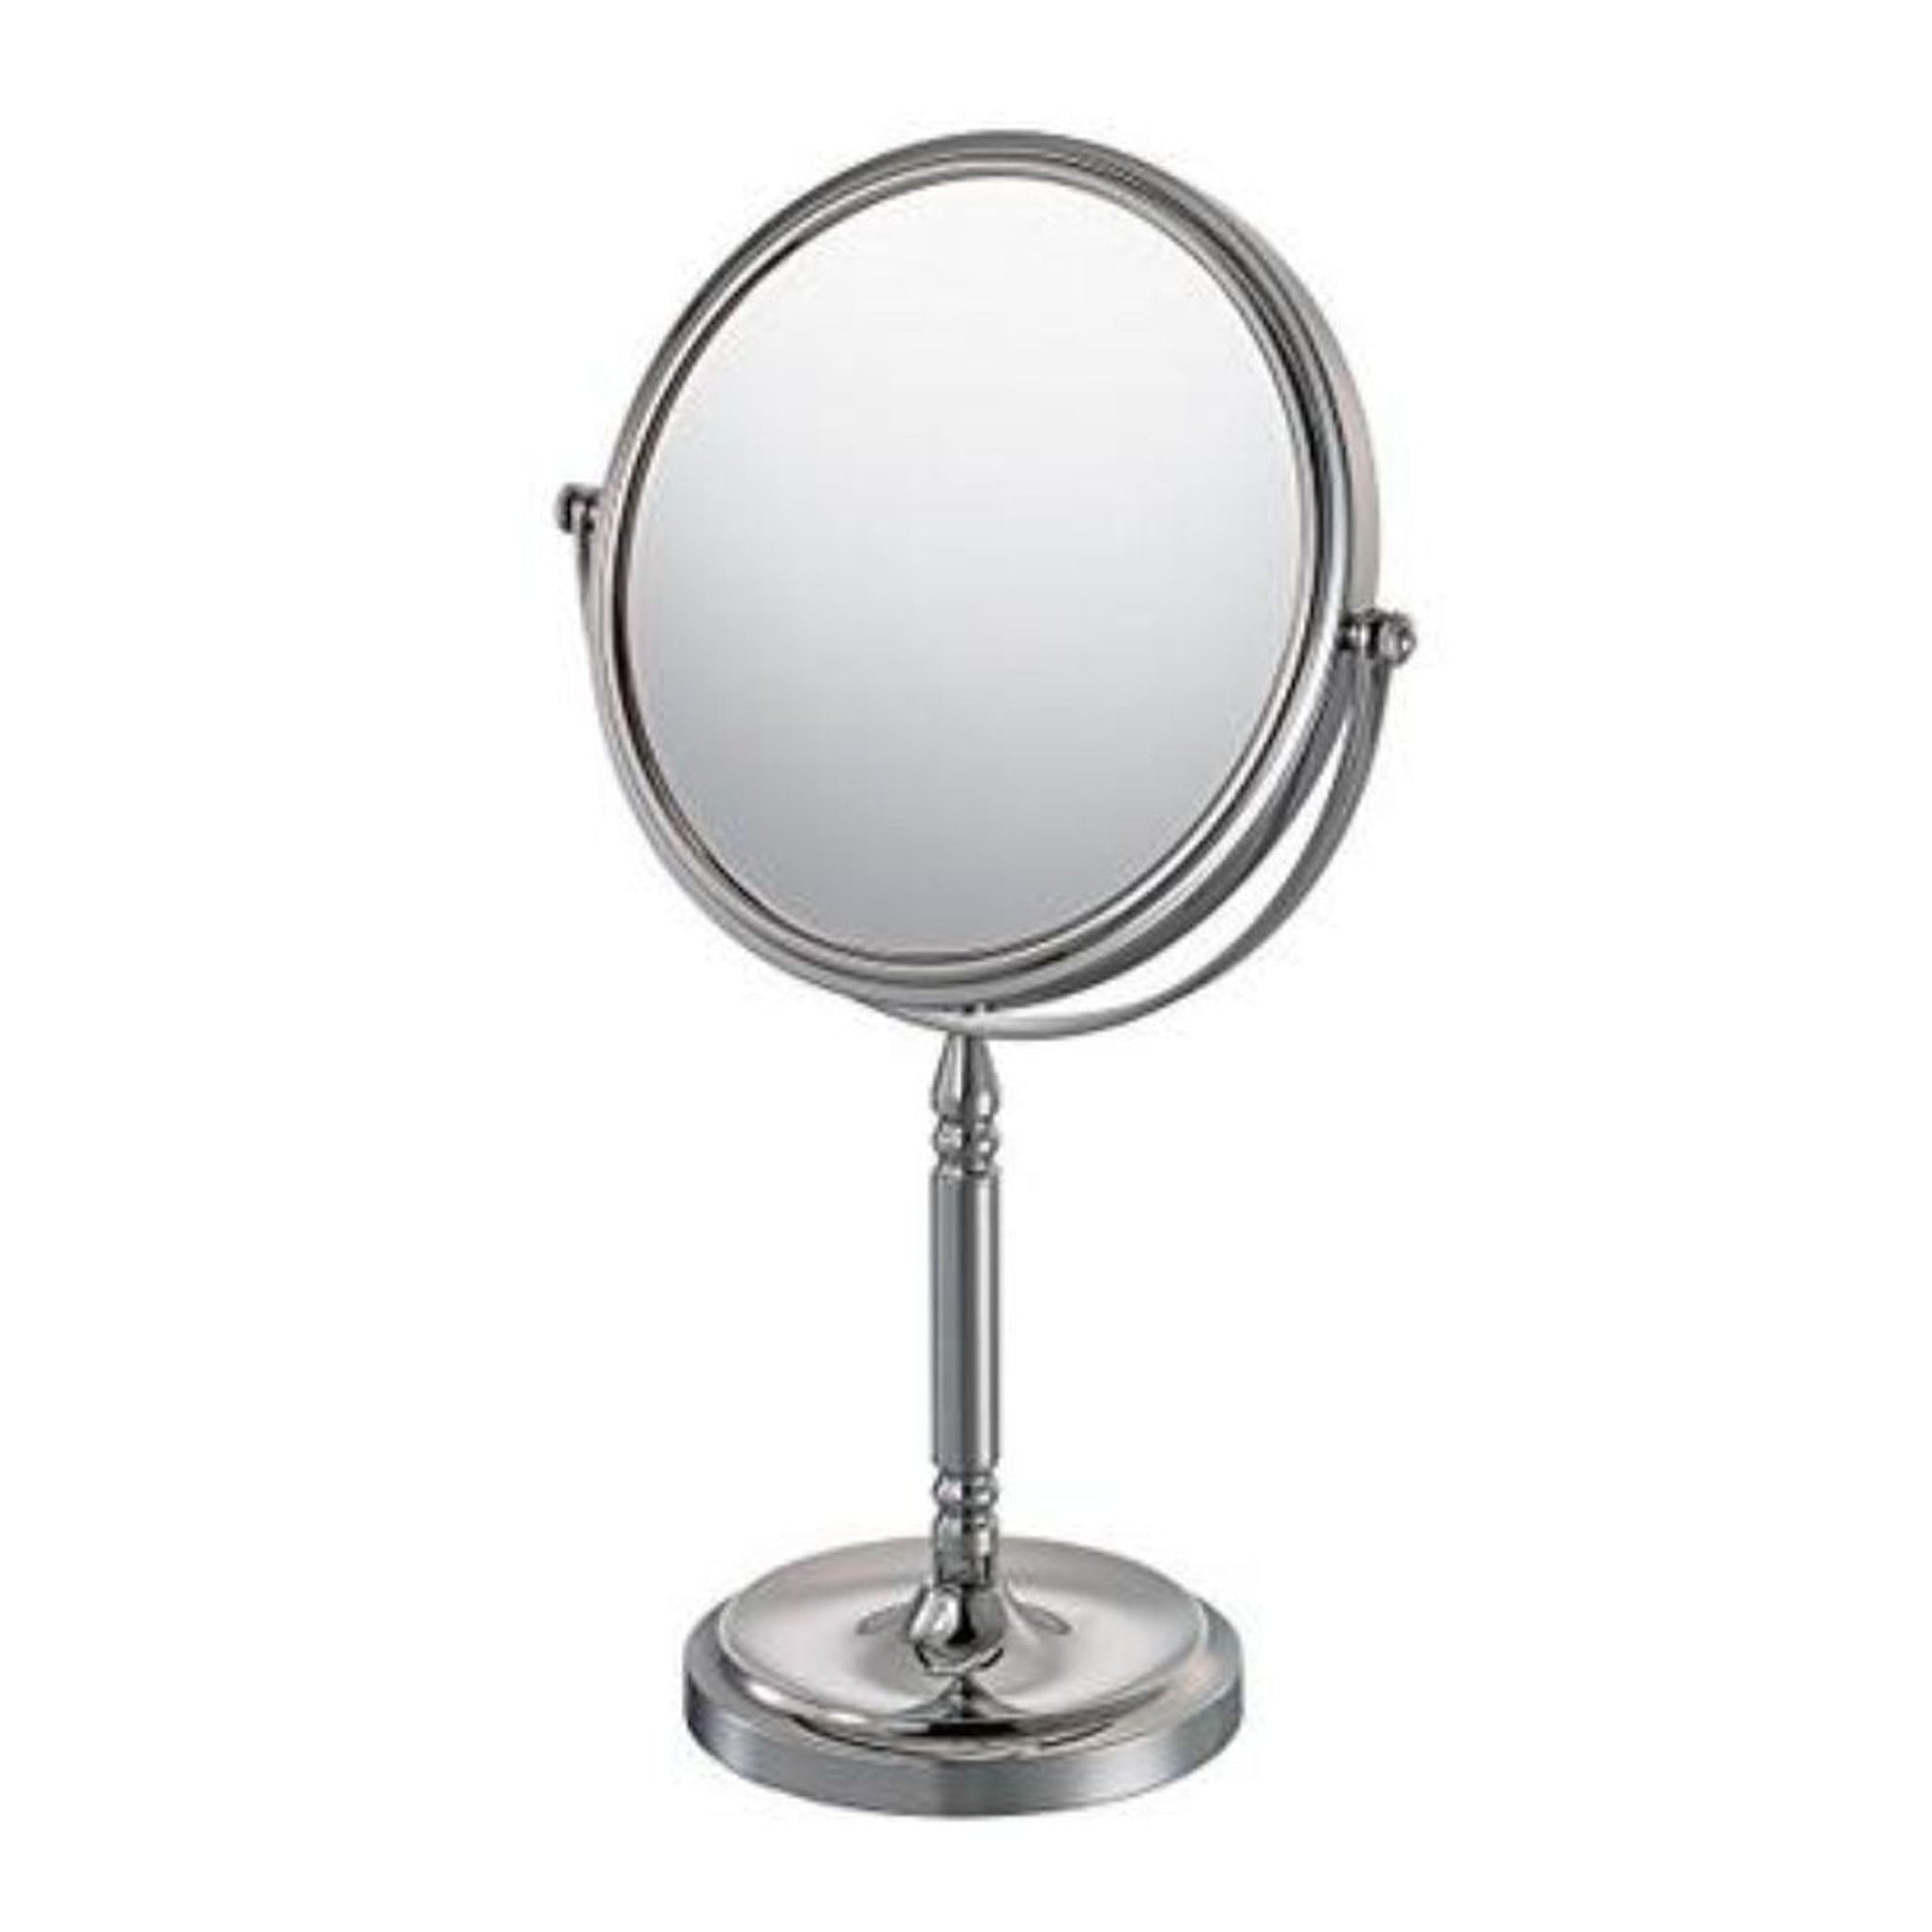 Aptations Mirror Image 8" x 15" Chrome Freestanding Recessed Base Double Sided 1X/10X Magnified Makeup Mirror